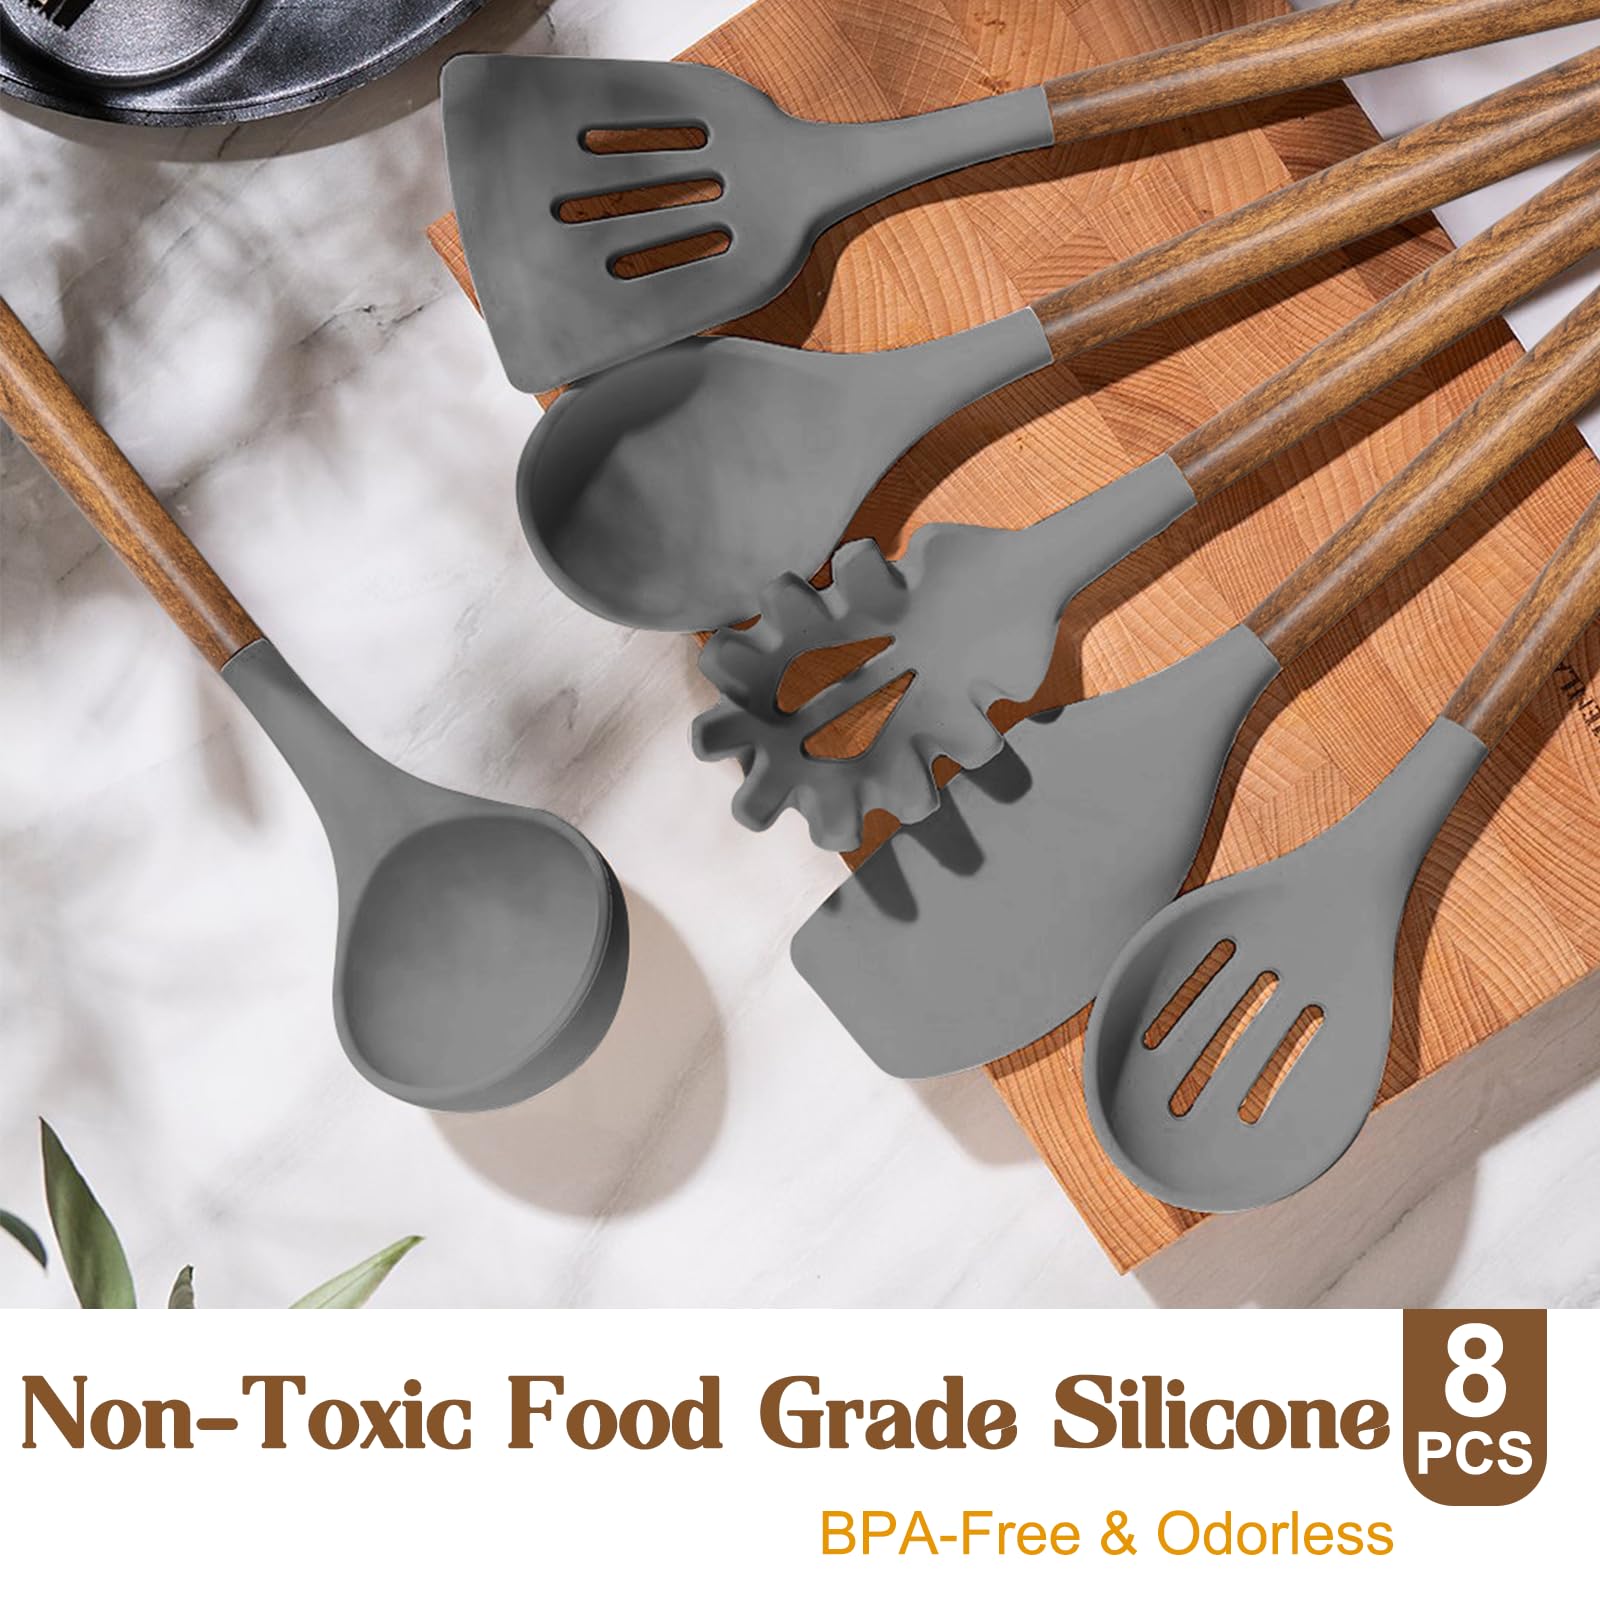 Umite Chef Silicone Cooking Utensil Set, 8-Piece Kitchen Utensils Set with Natural Acacia Wooden Handles,Food-Grade Silicone Heads-Silicone Kitchen Gadgets and Spatula Set for Nonstick Cookware - Grey